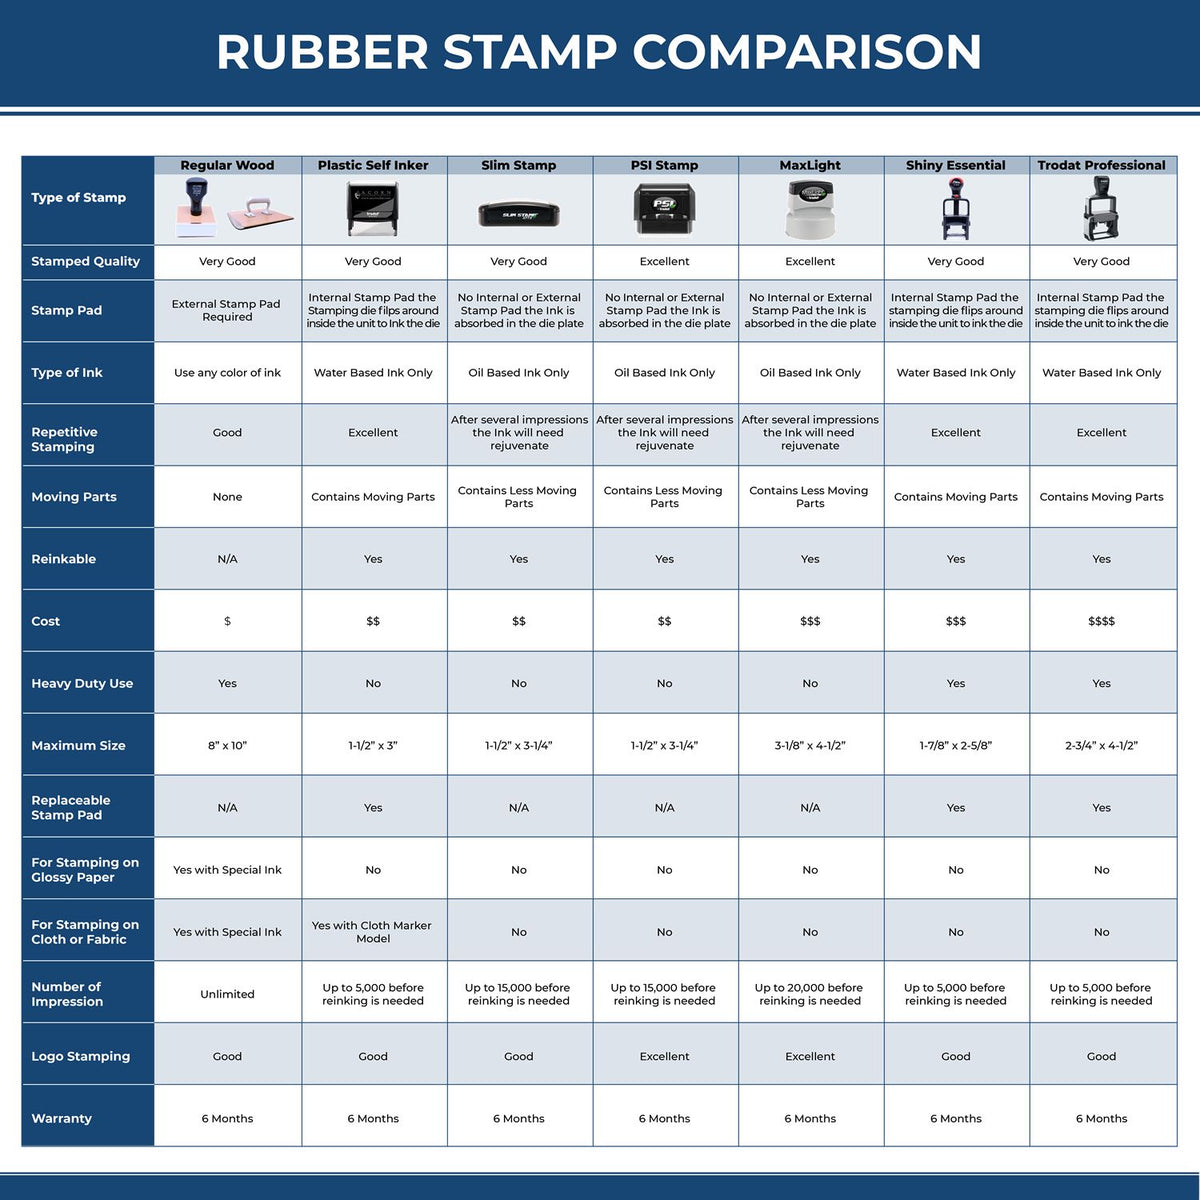 A comparison chart for the different types of mount models available for the PSI Massachusetts Notary Stamp.